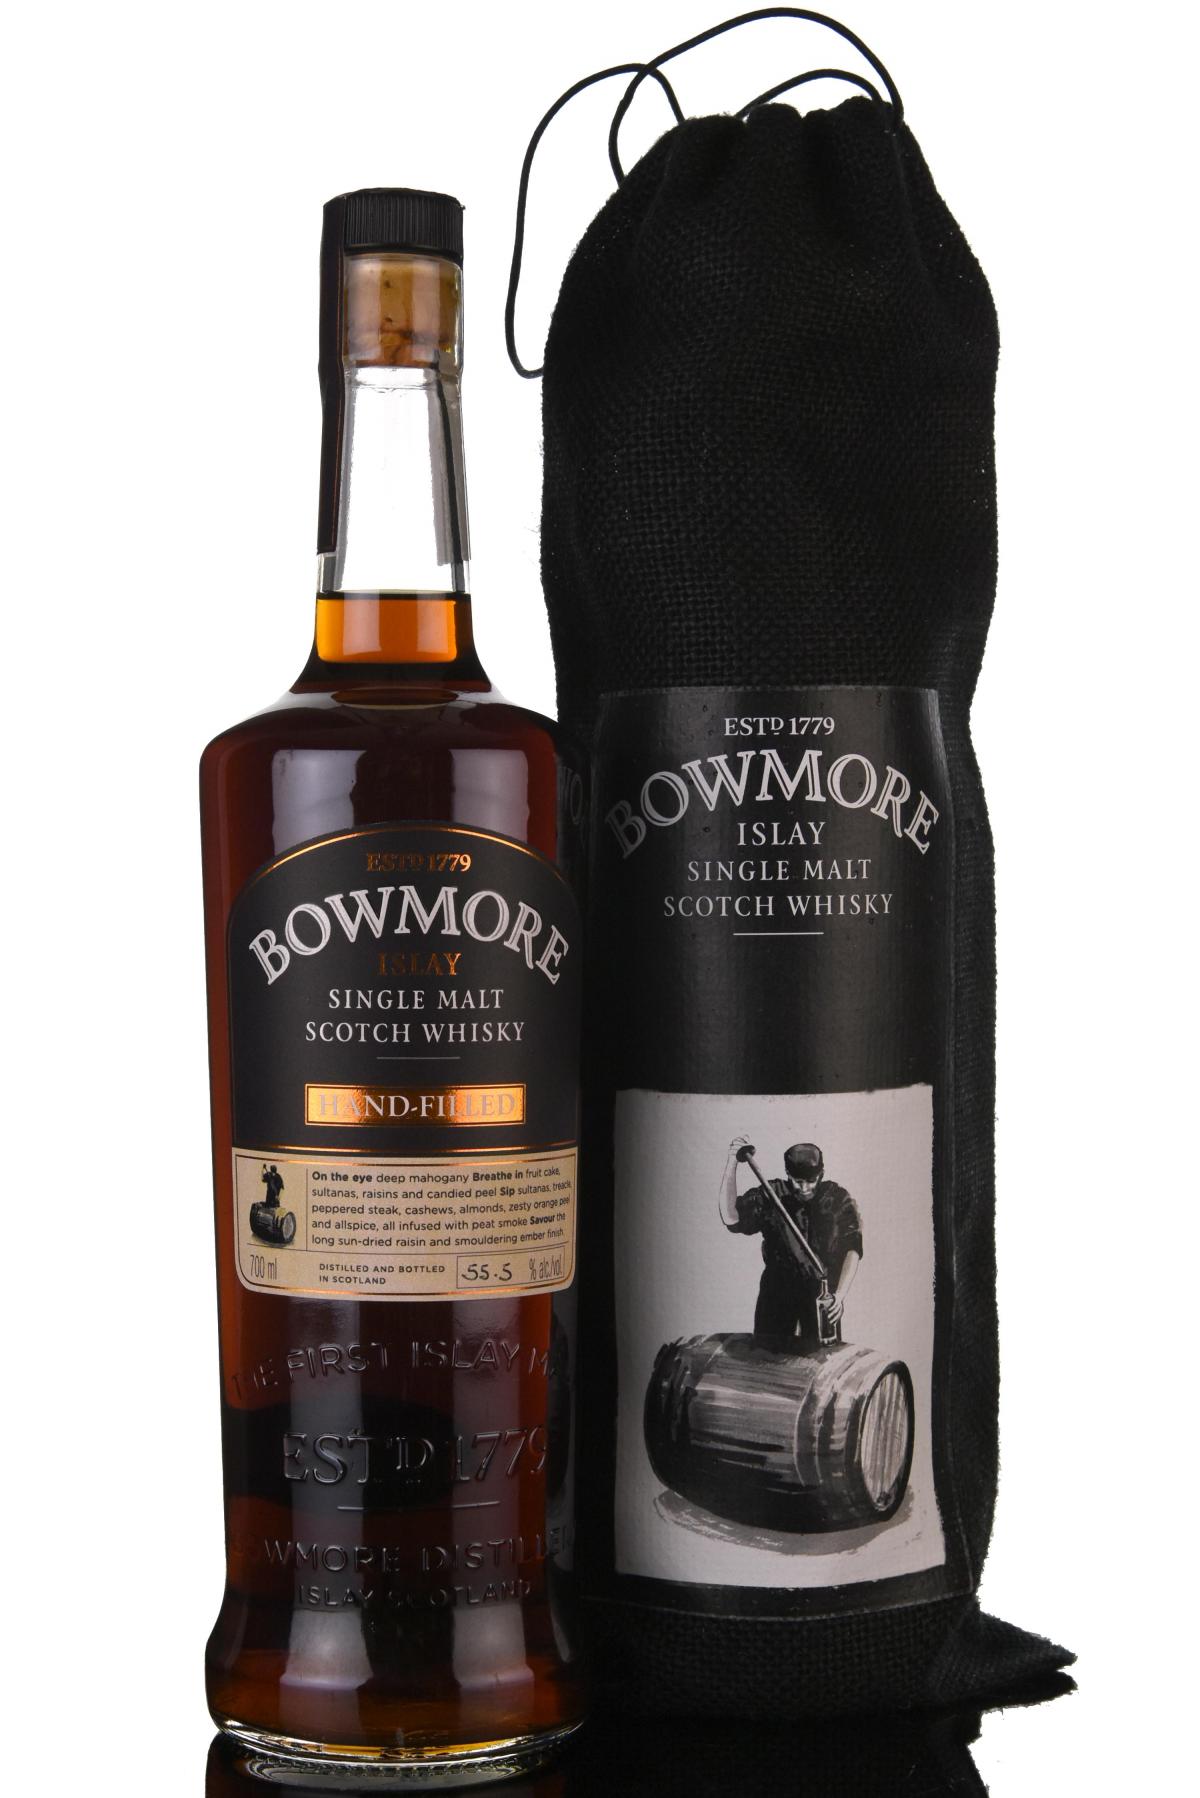 Bowmore 1997-2013 - Hand Filled Cask 23 - 55.5%